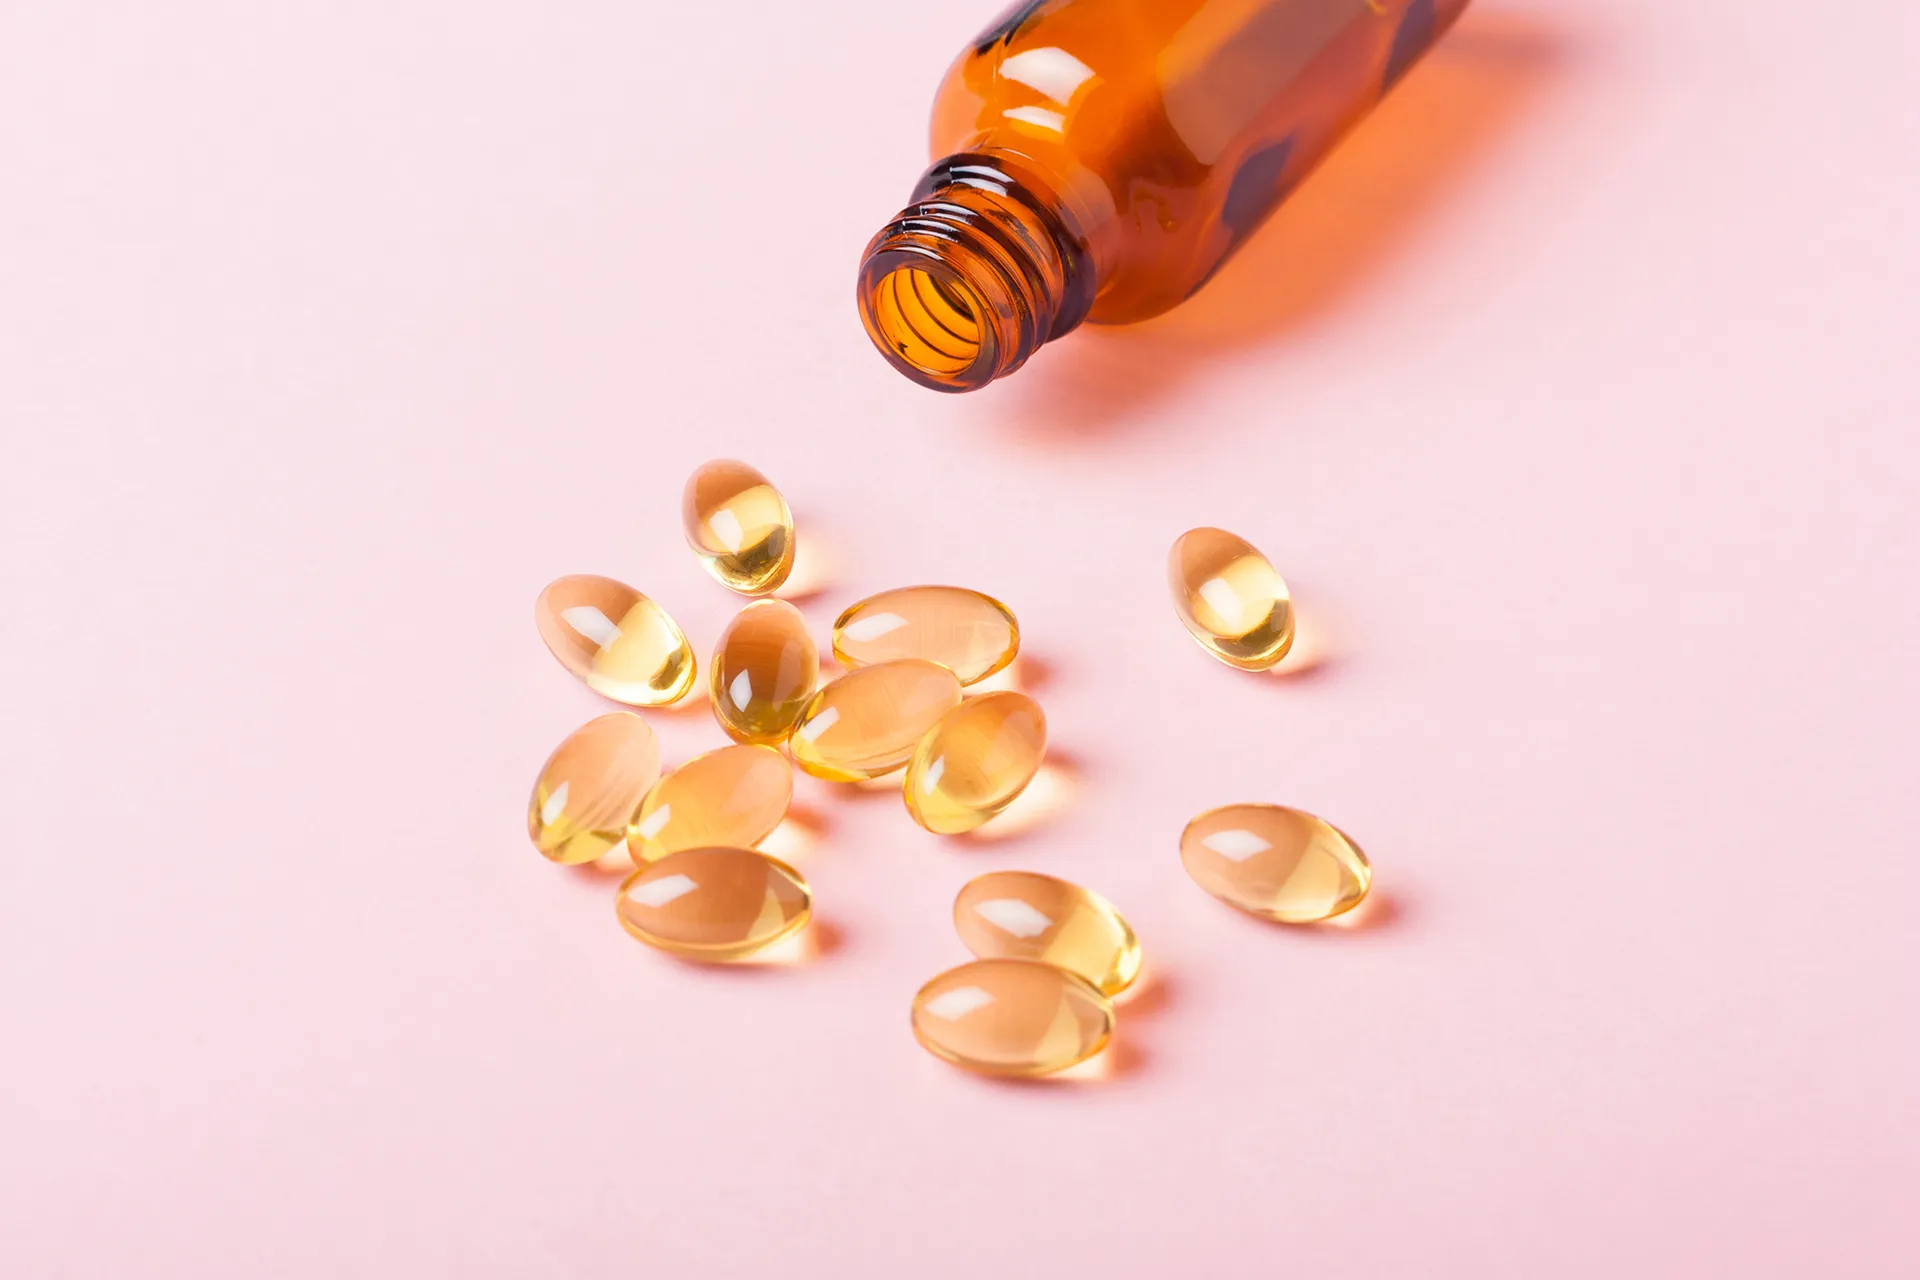 Benefit of Fish Oil